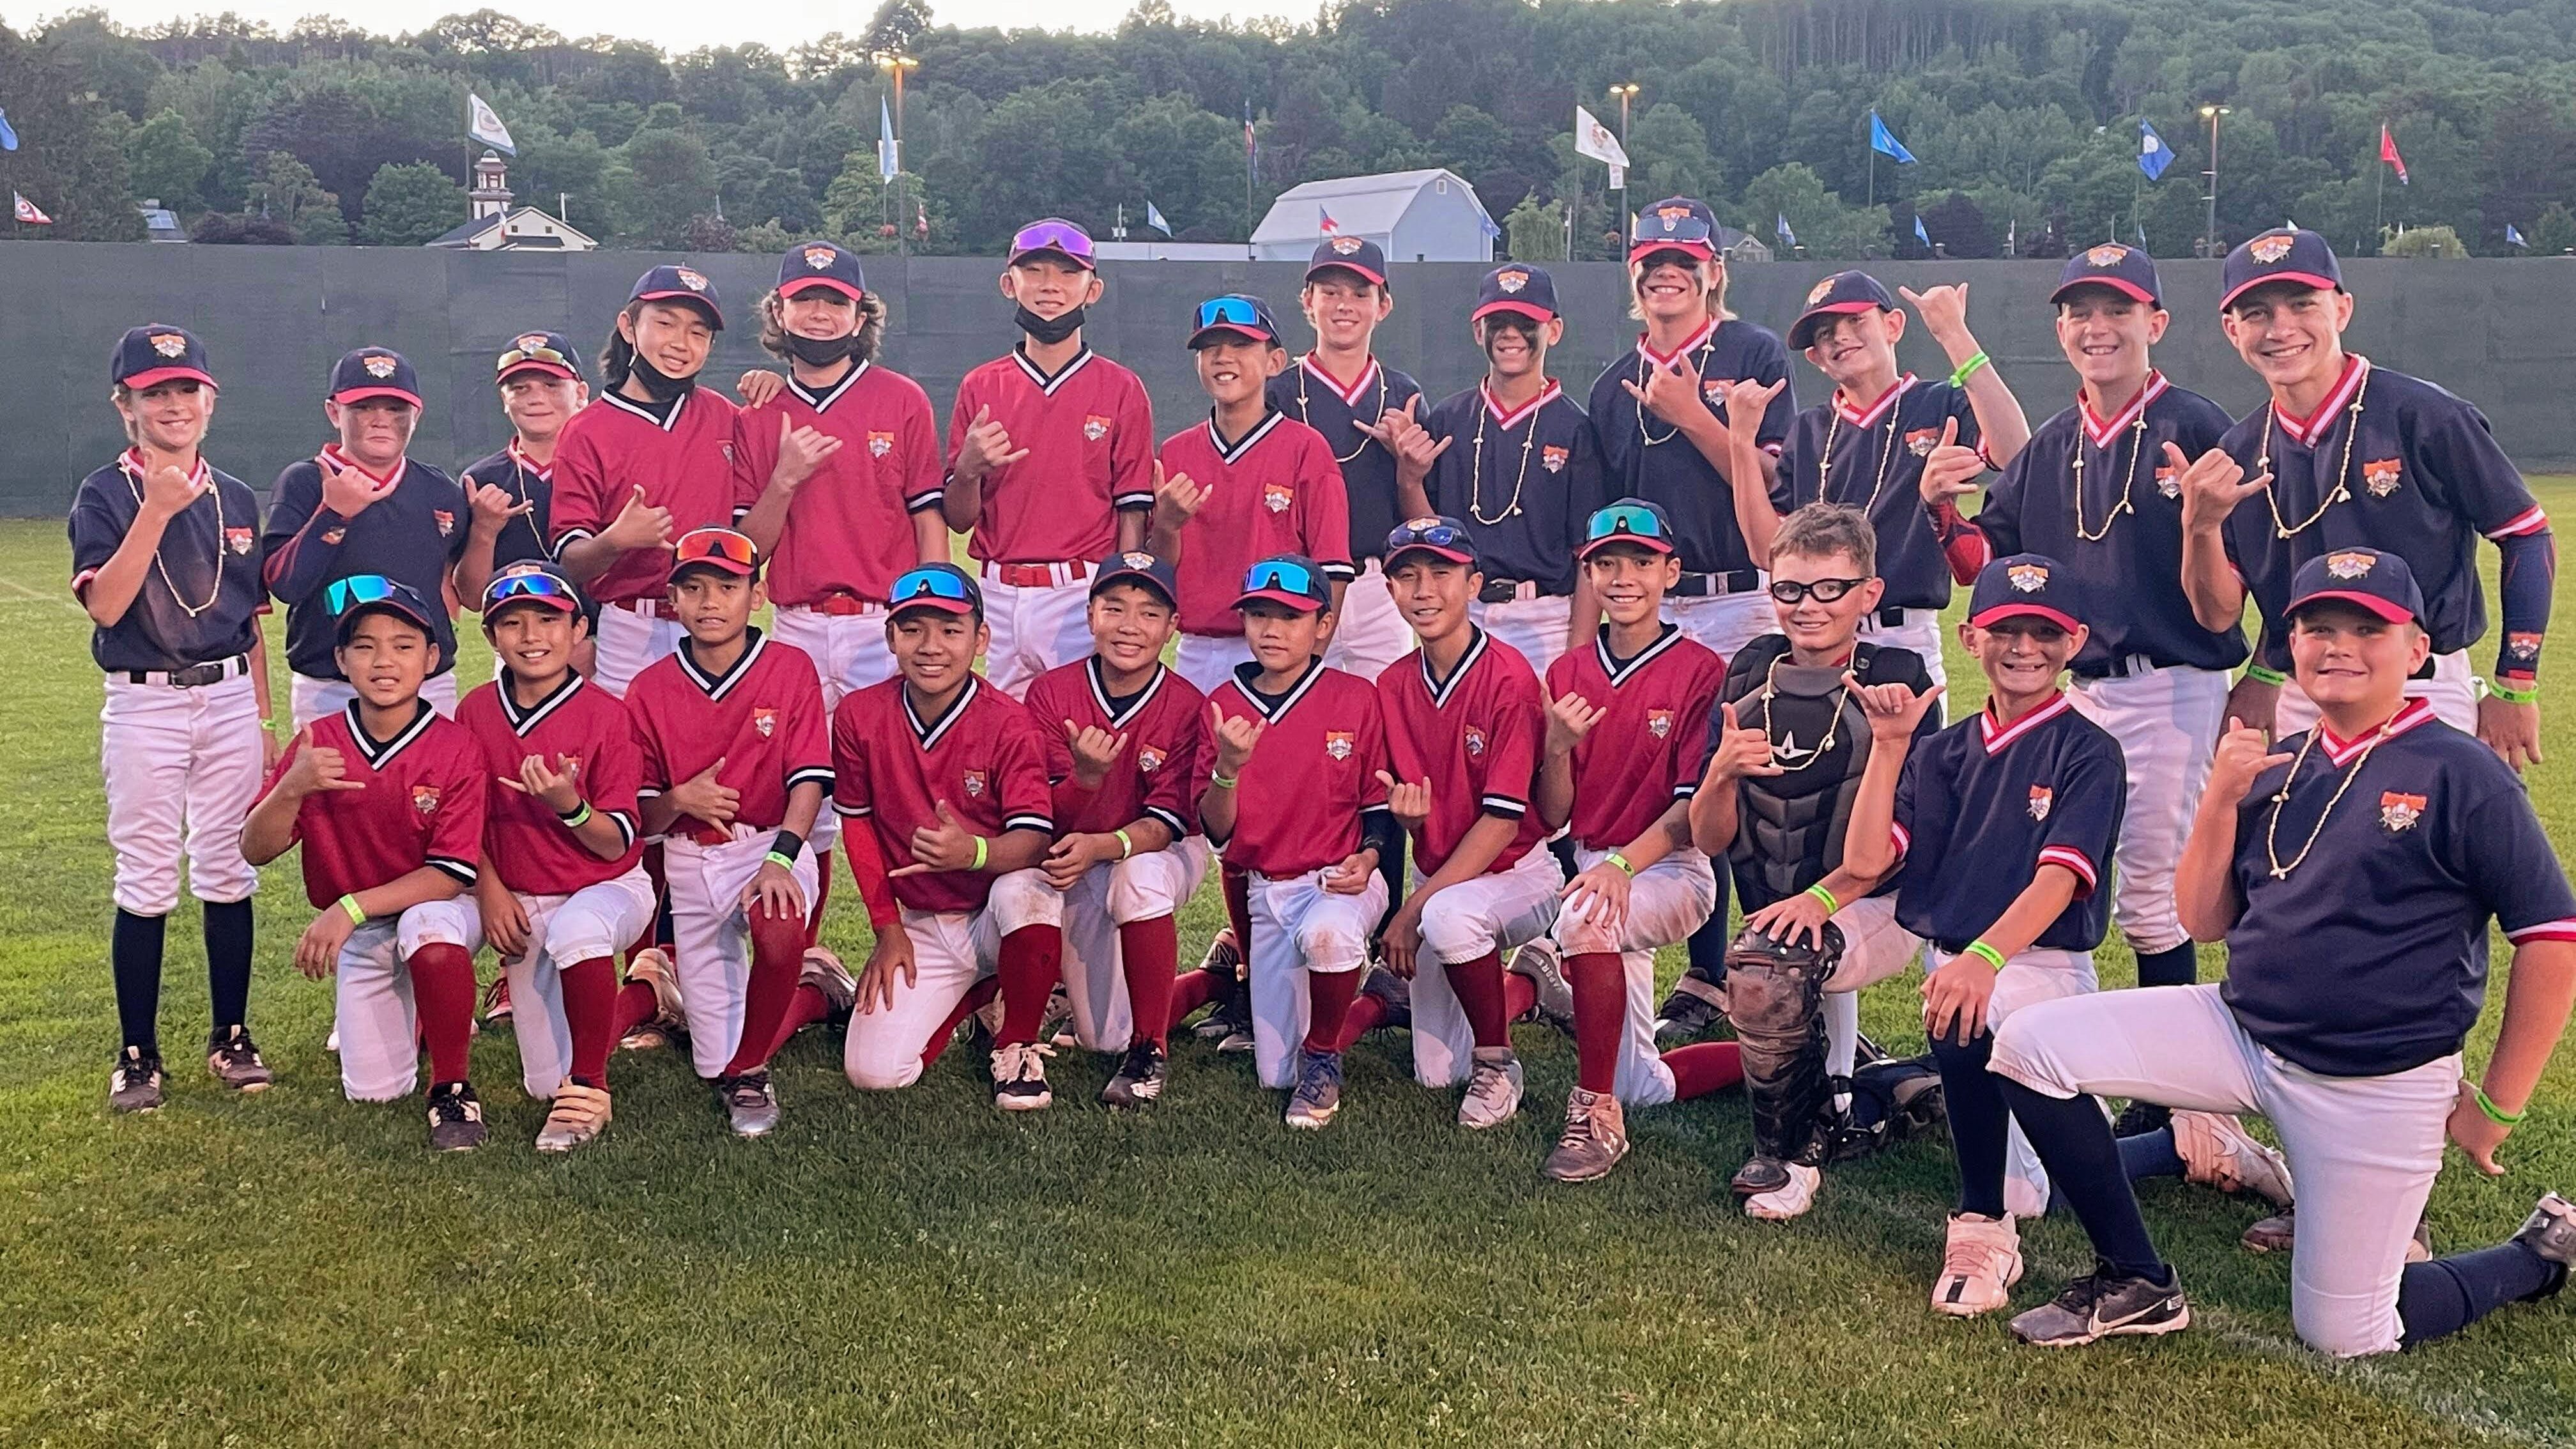 Wasatch Wasps baseball: Our ultimate 4th of July - BVM Sports